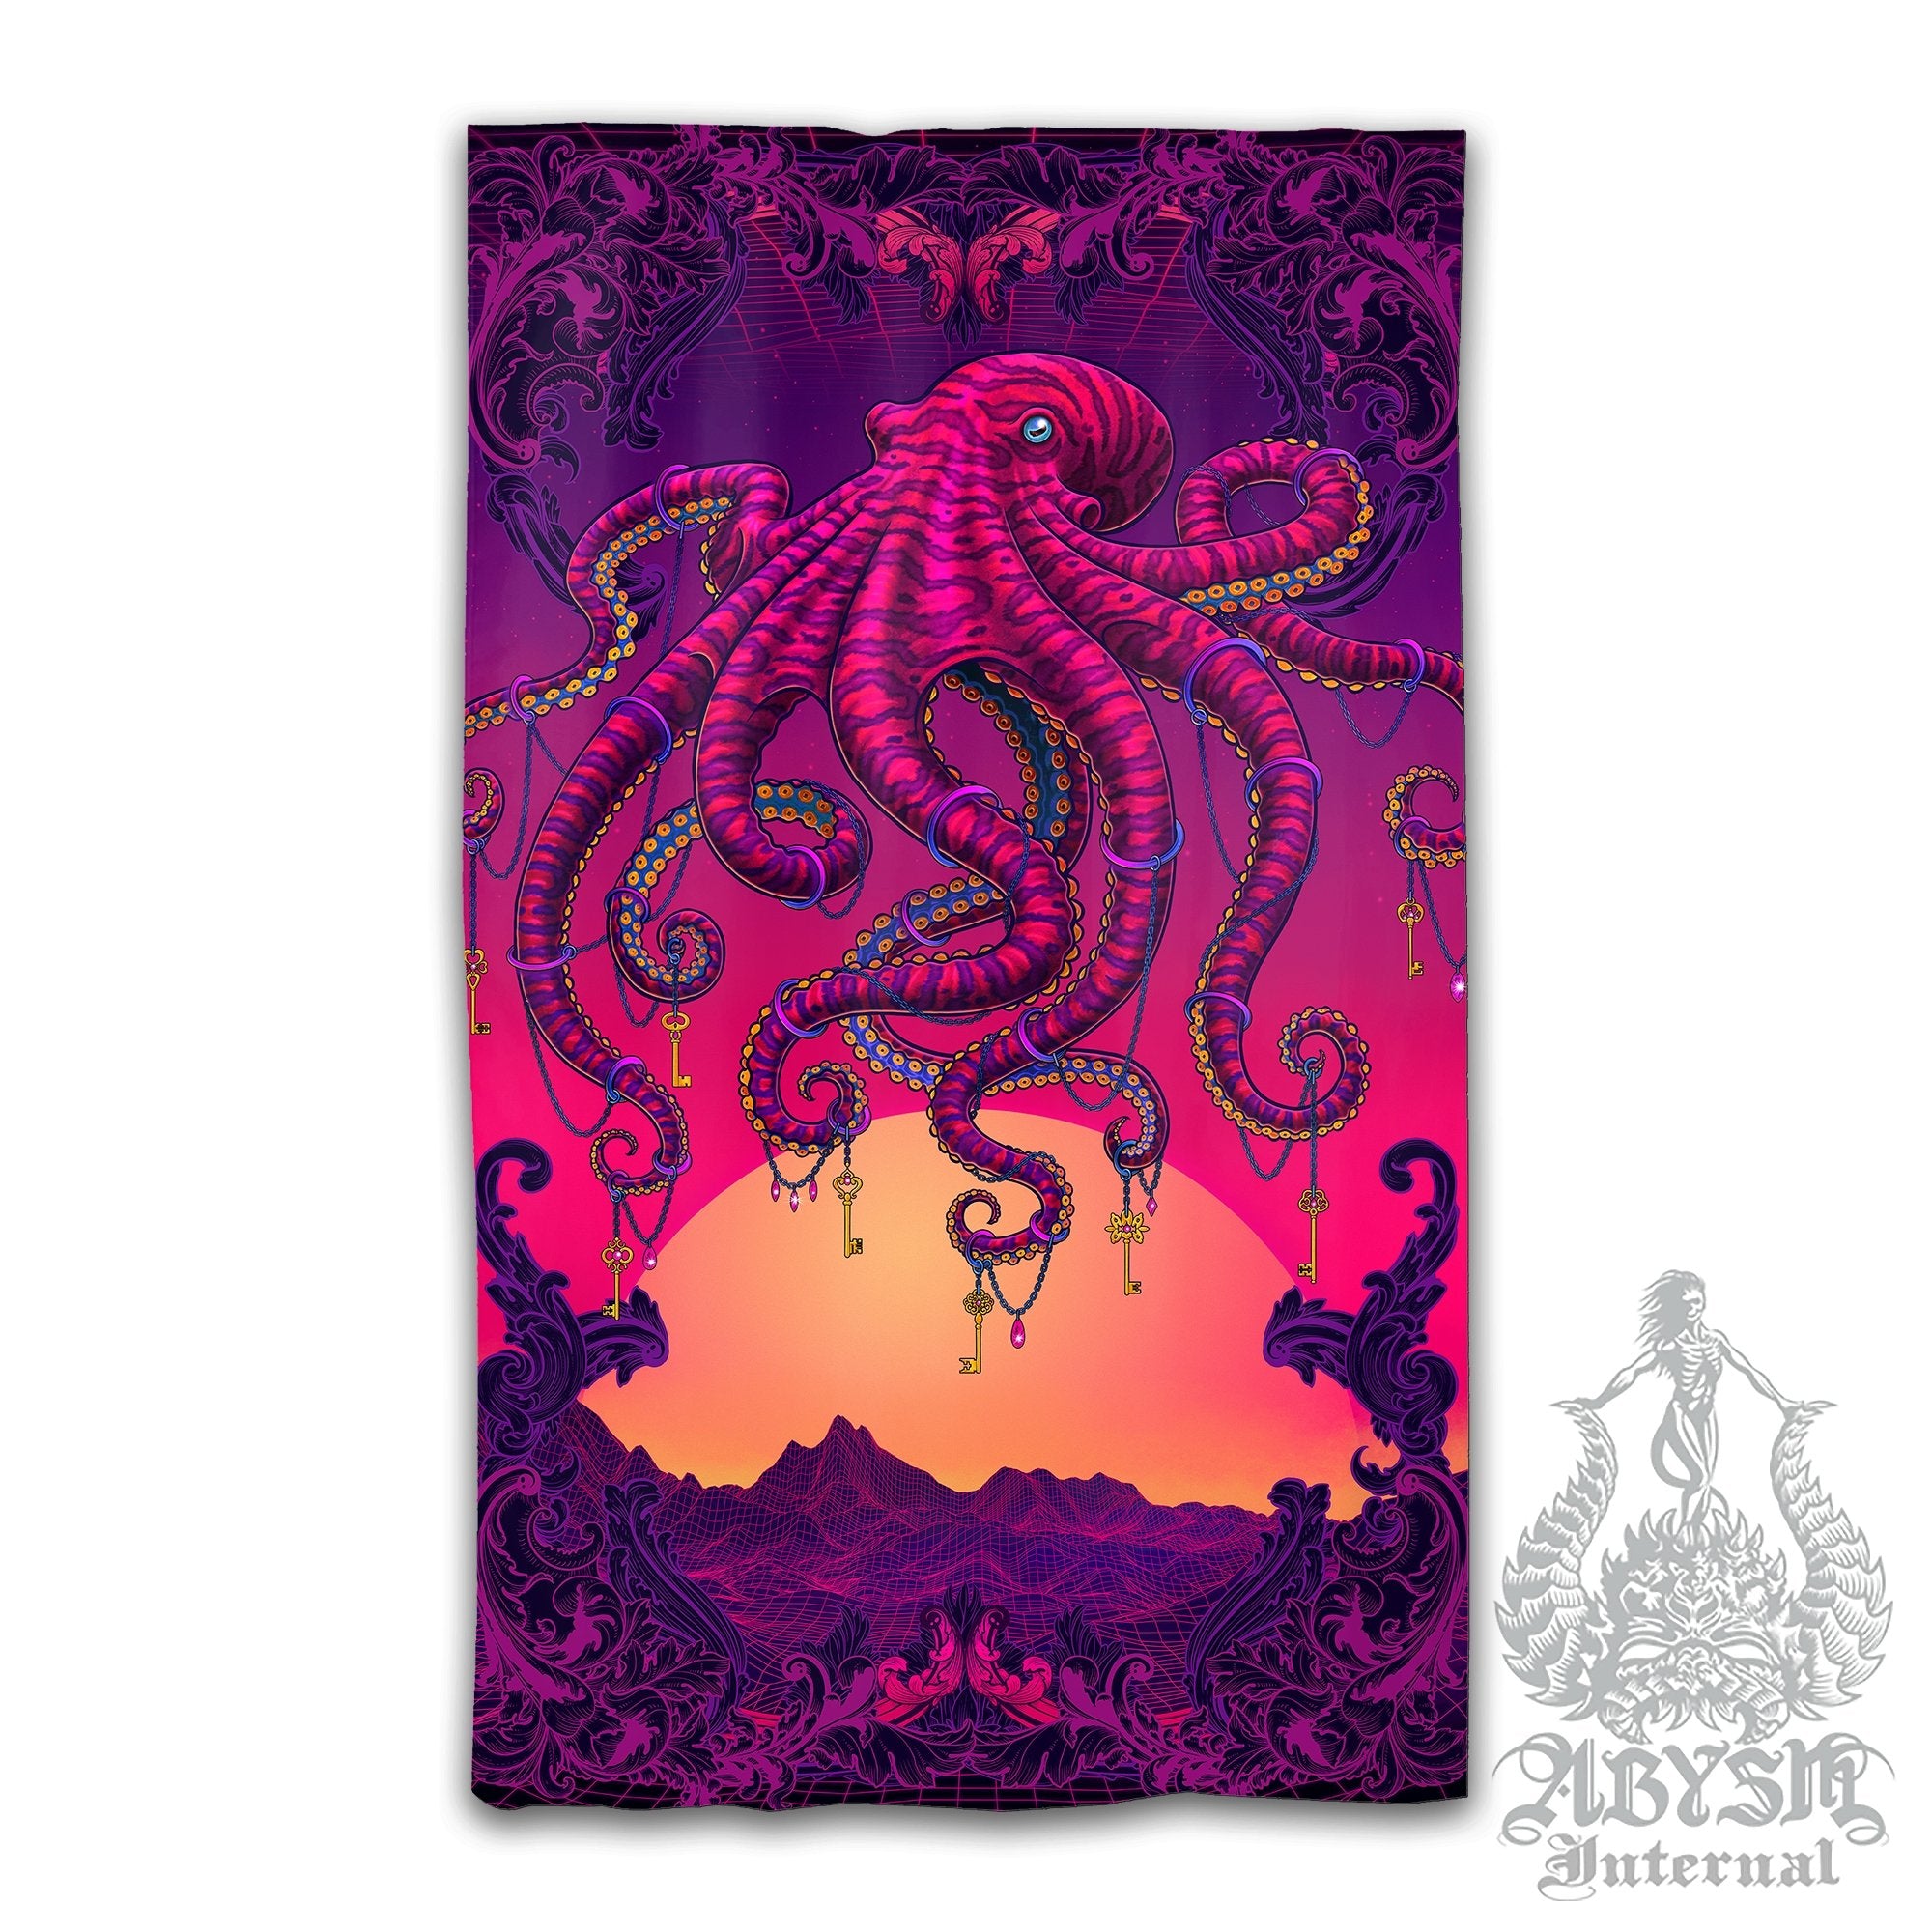 Vaporwave Blackout Curtains, Long Window Panels, Psychedelic Art Print, Synthwave Room Decor, 80s Gamer Retrowave Home and Shop Decor - Octopus - Abysm Internal